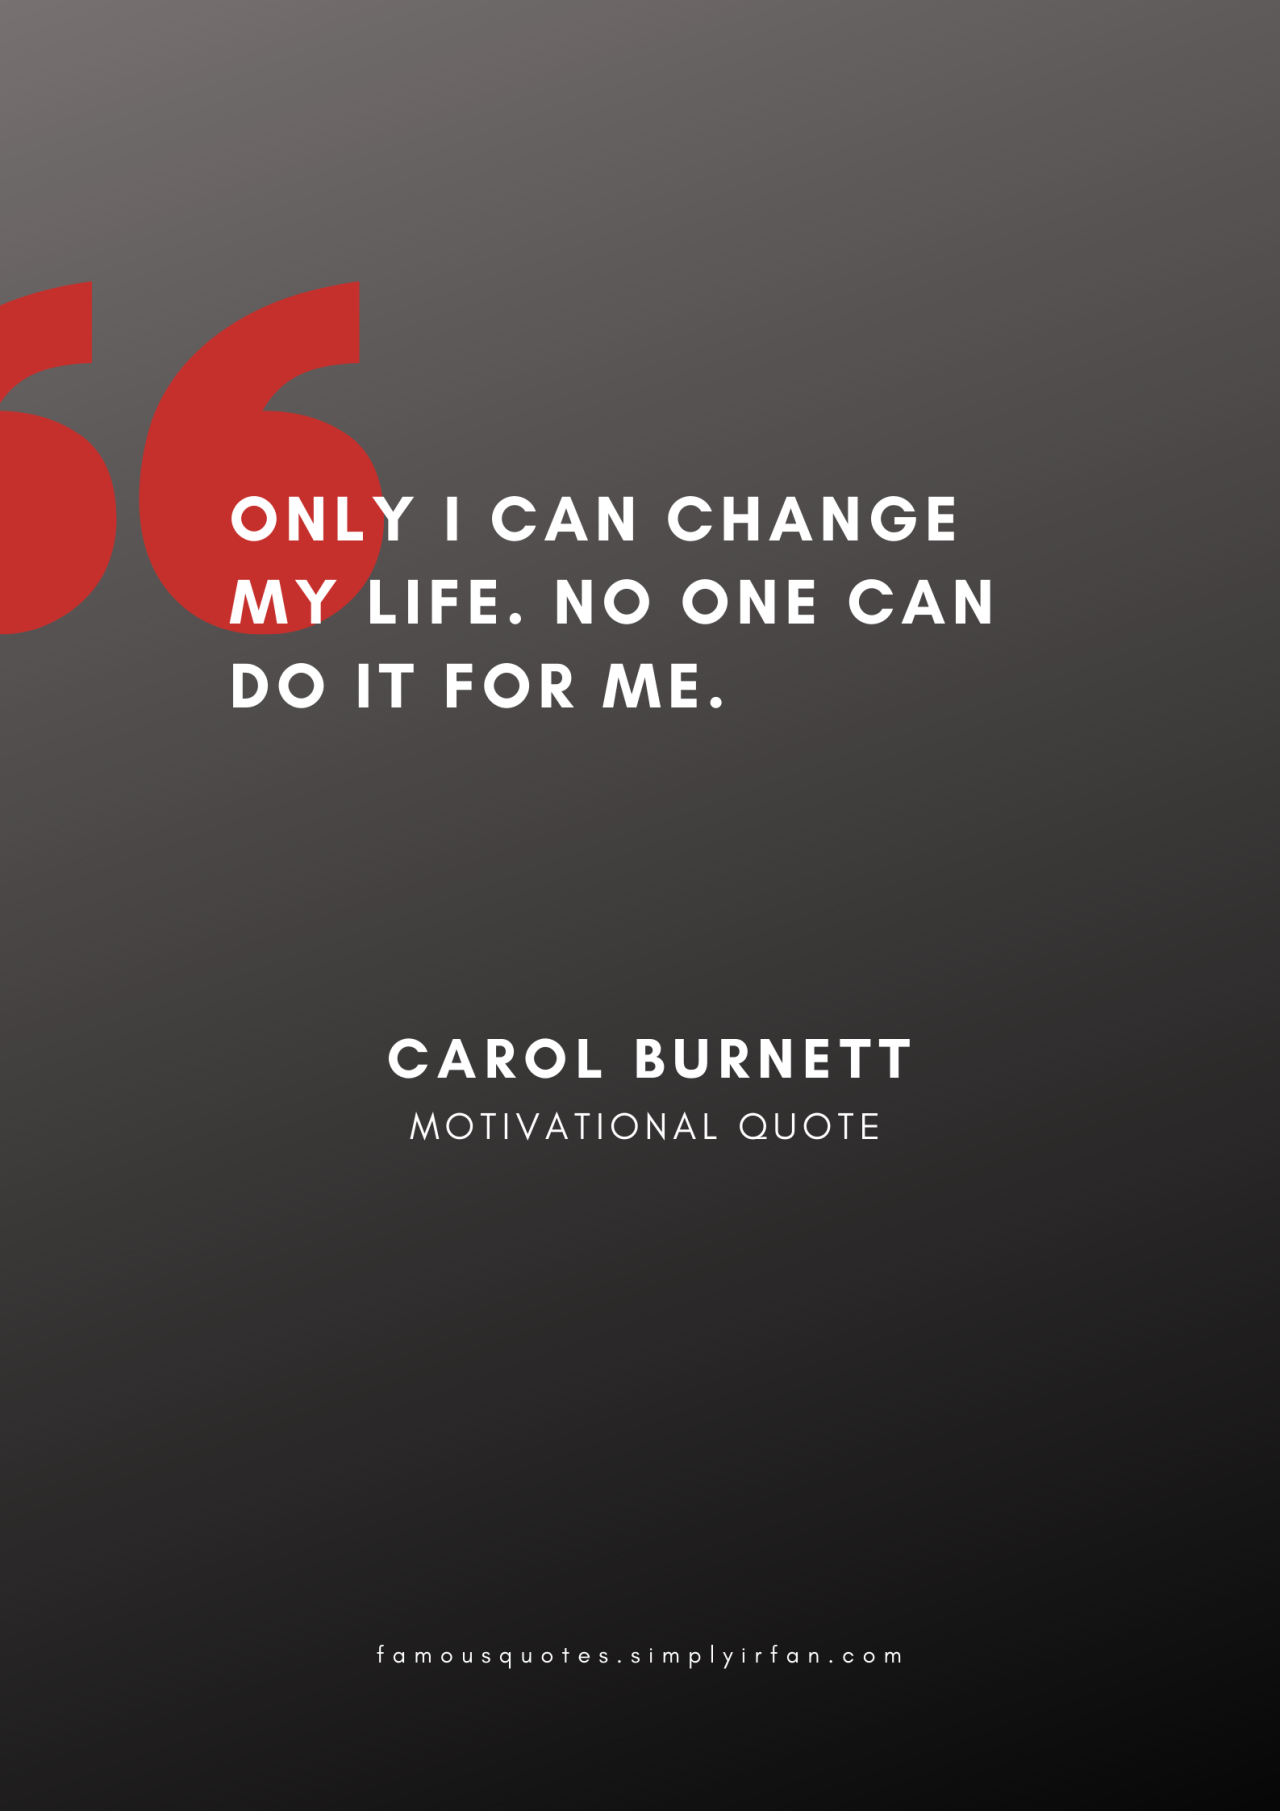 Only I can change my life. No one can do it for me. Quote by Carol Burnett